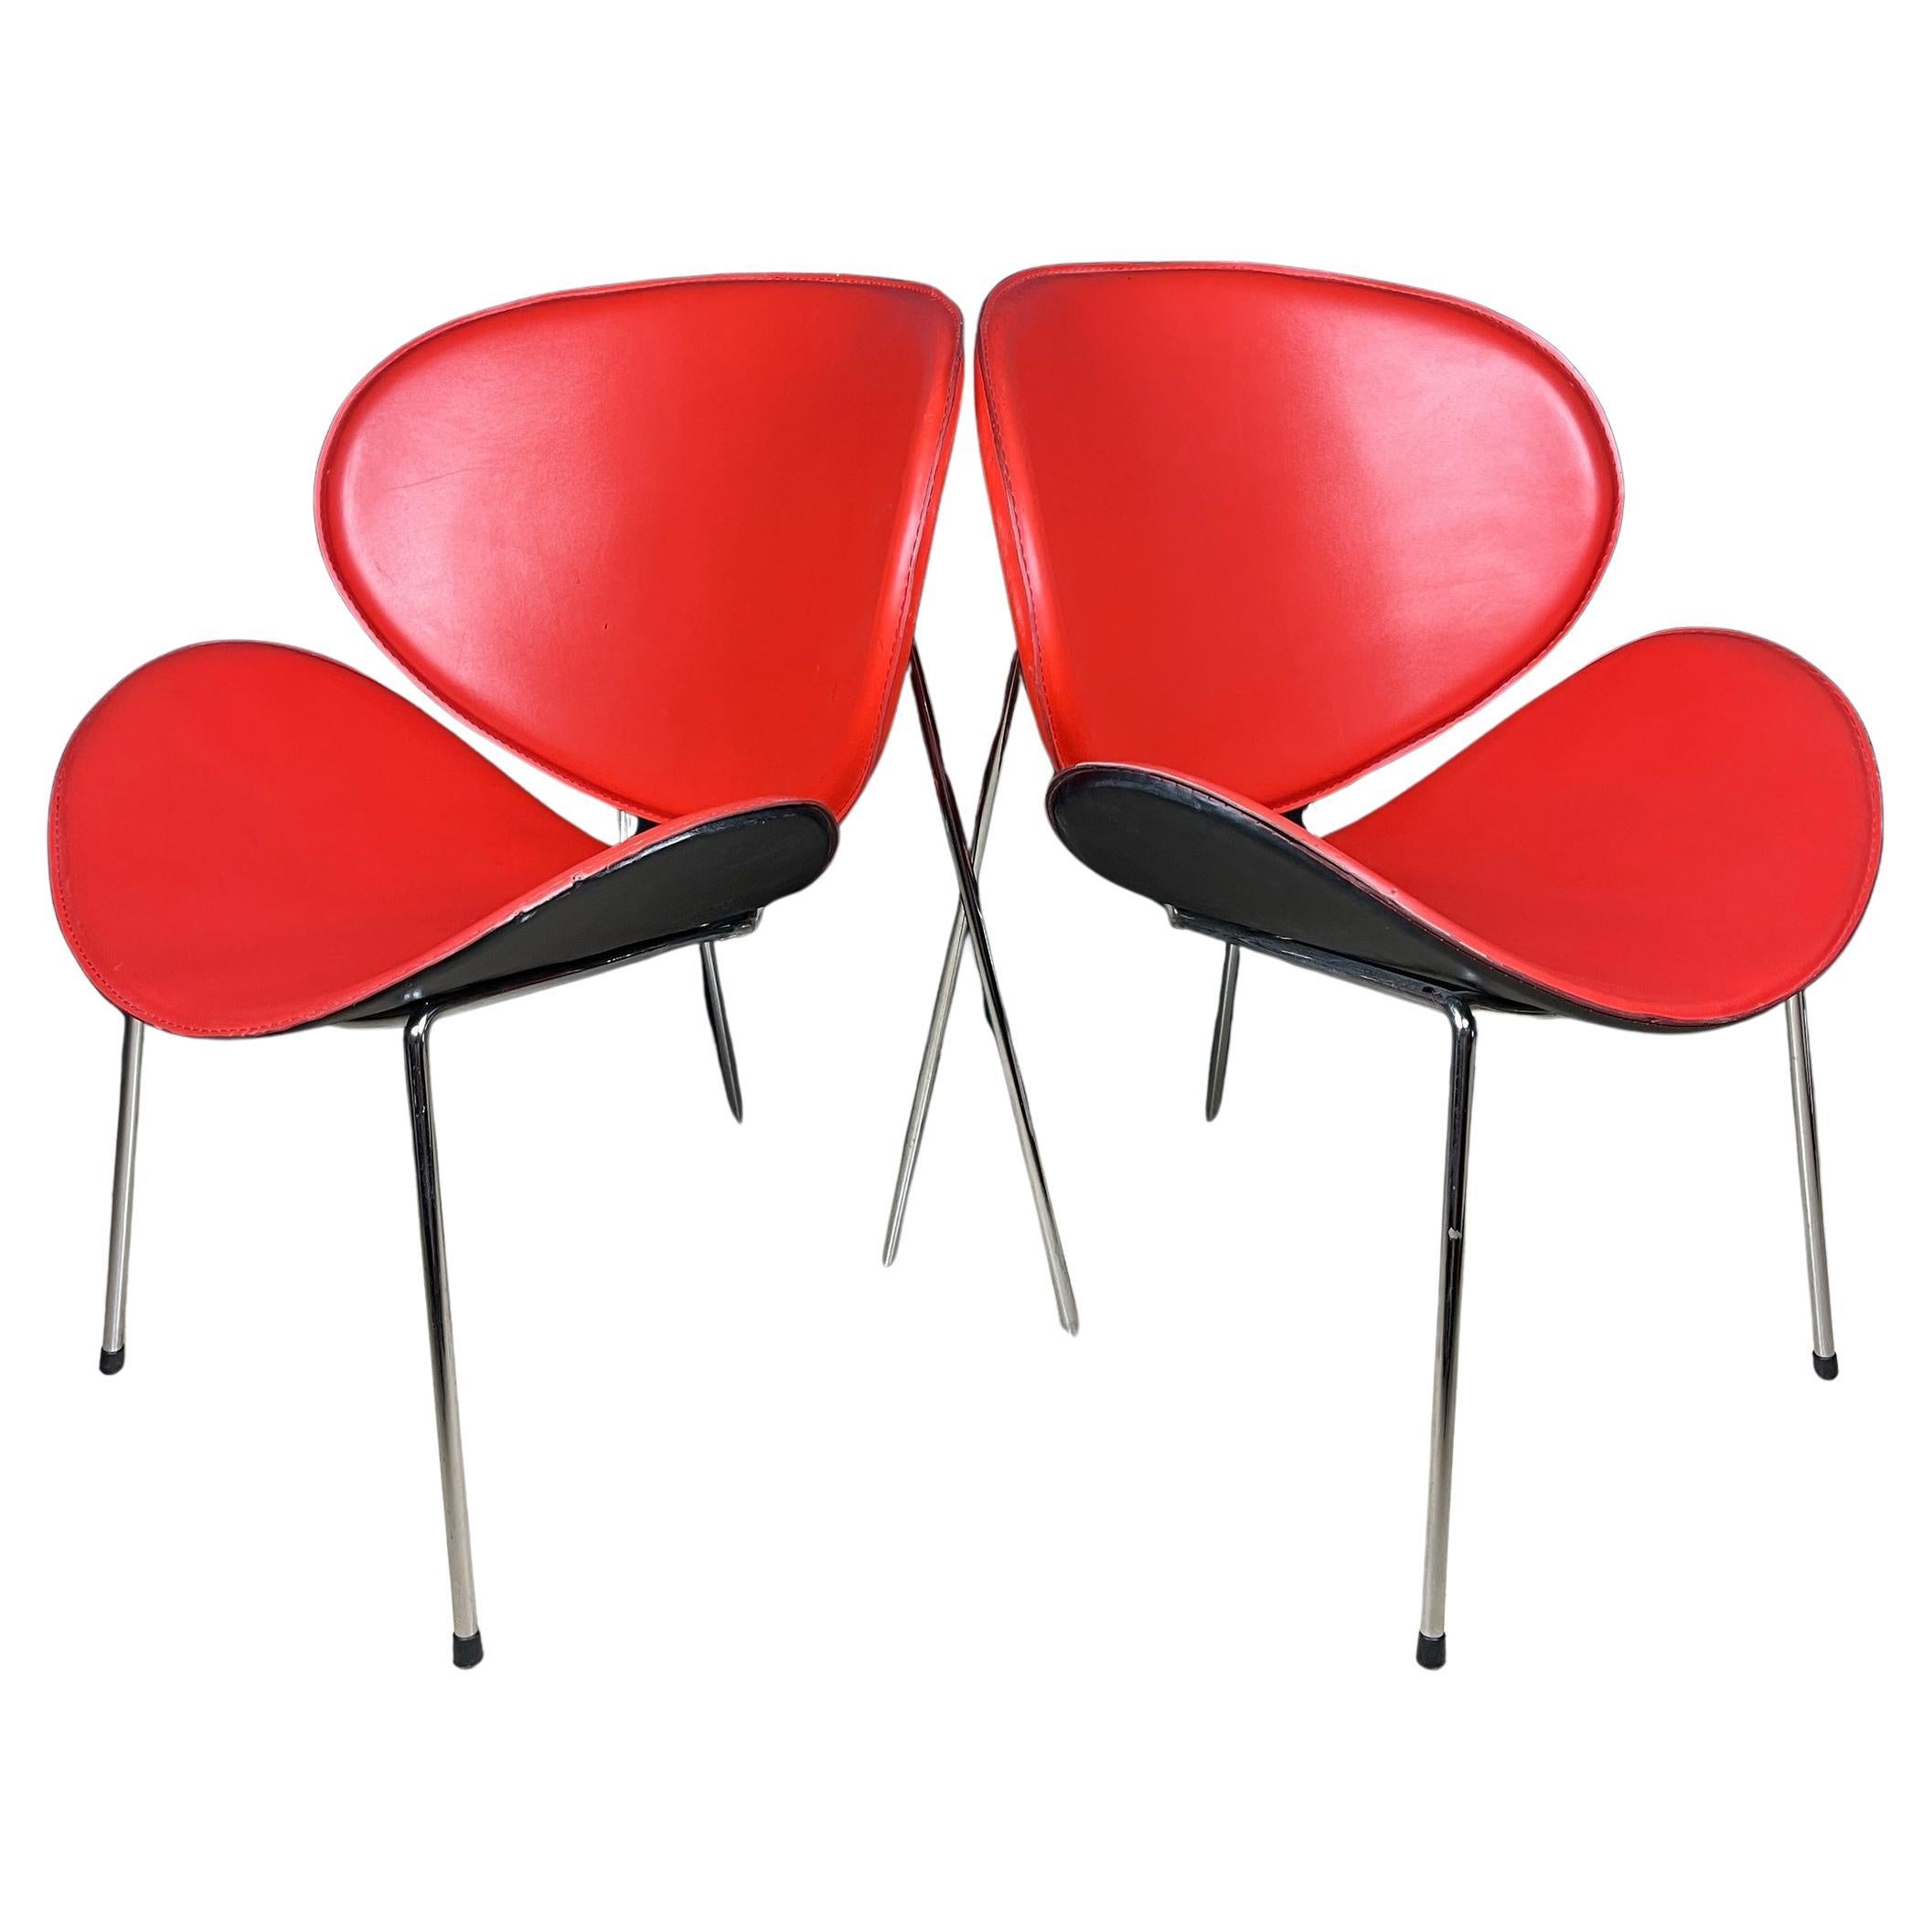 Pair of red lounge chairs Italy 1990s Design Pierre Paulin Style